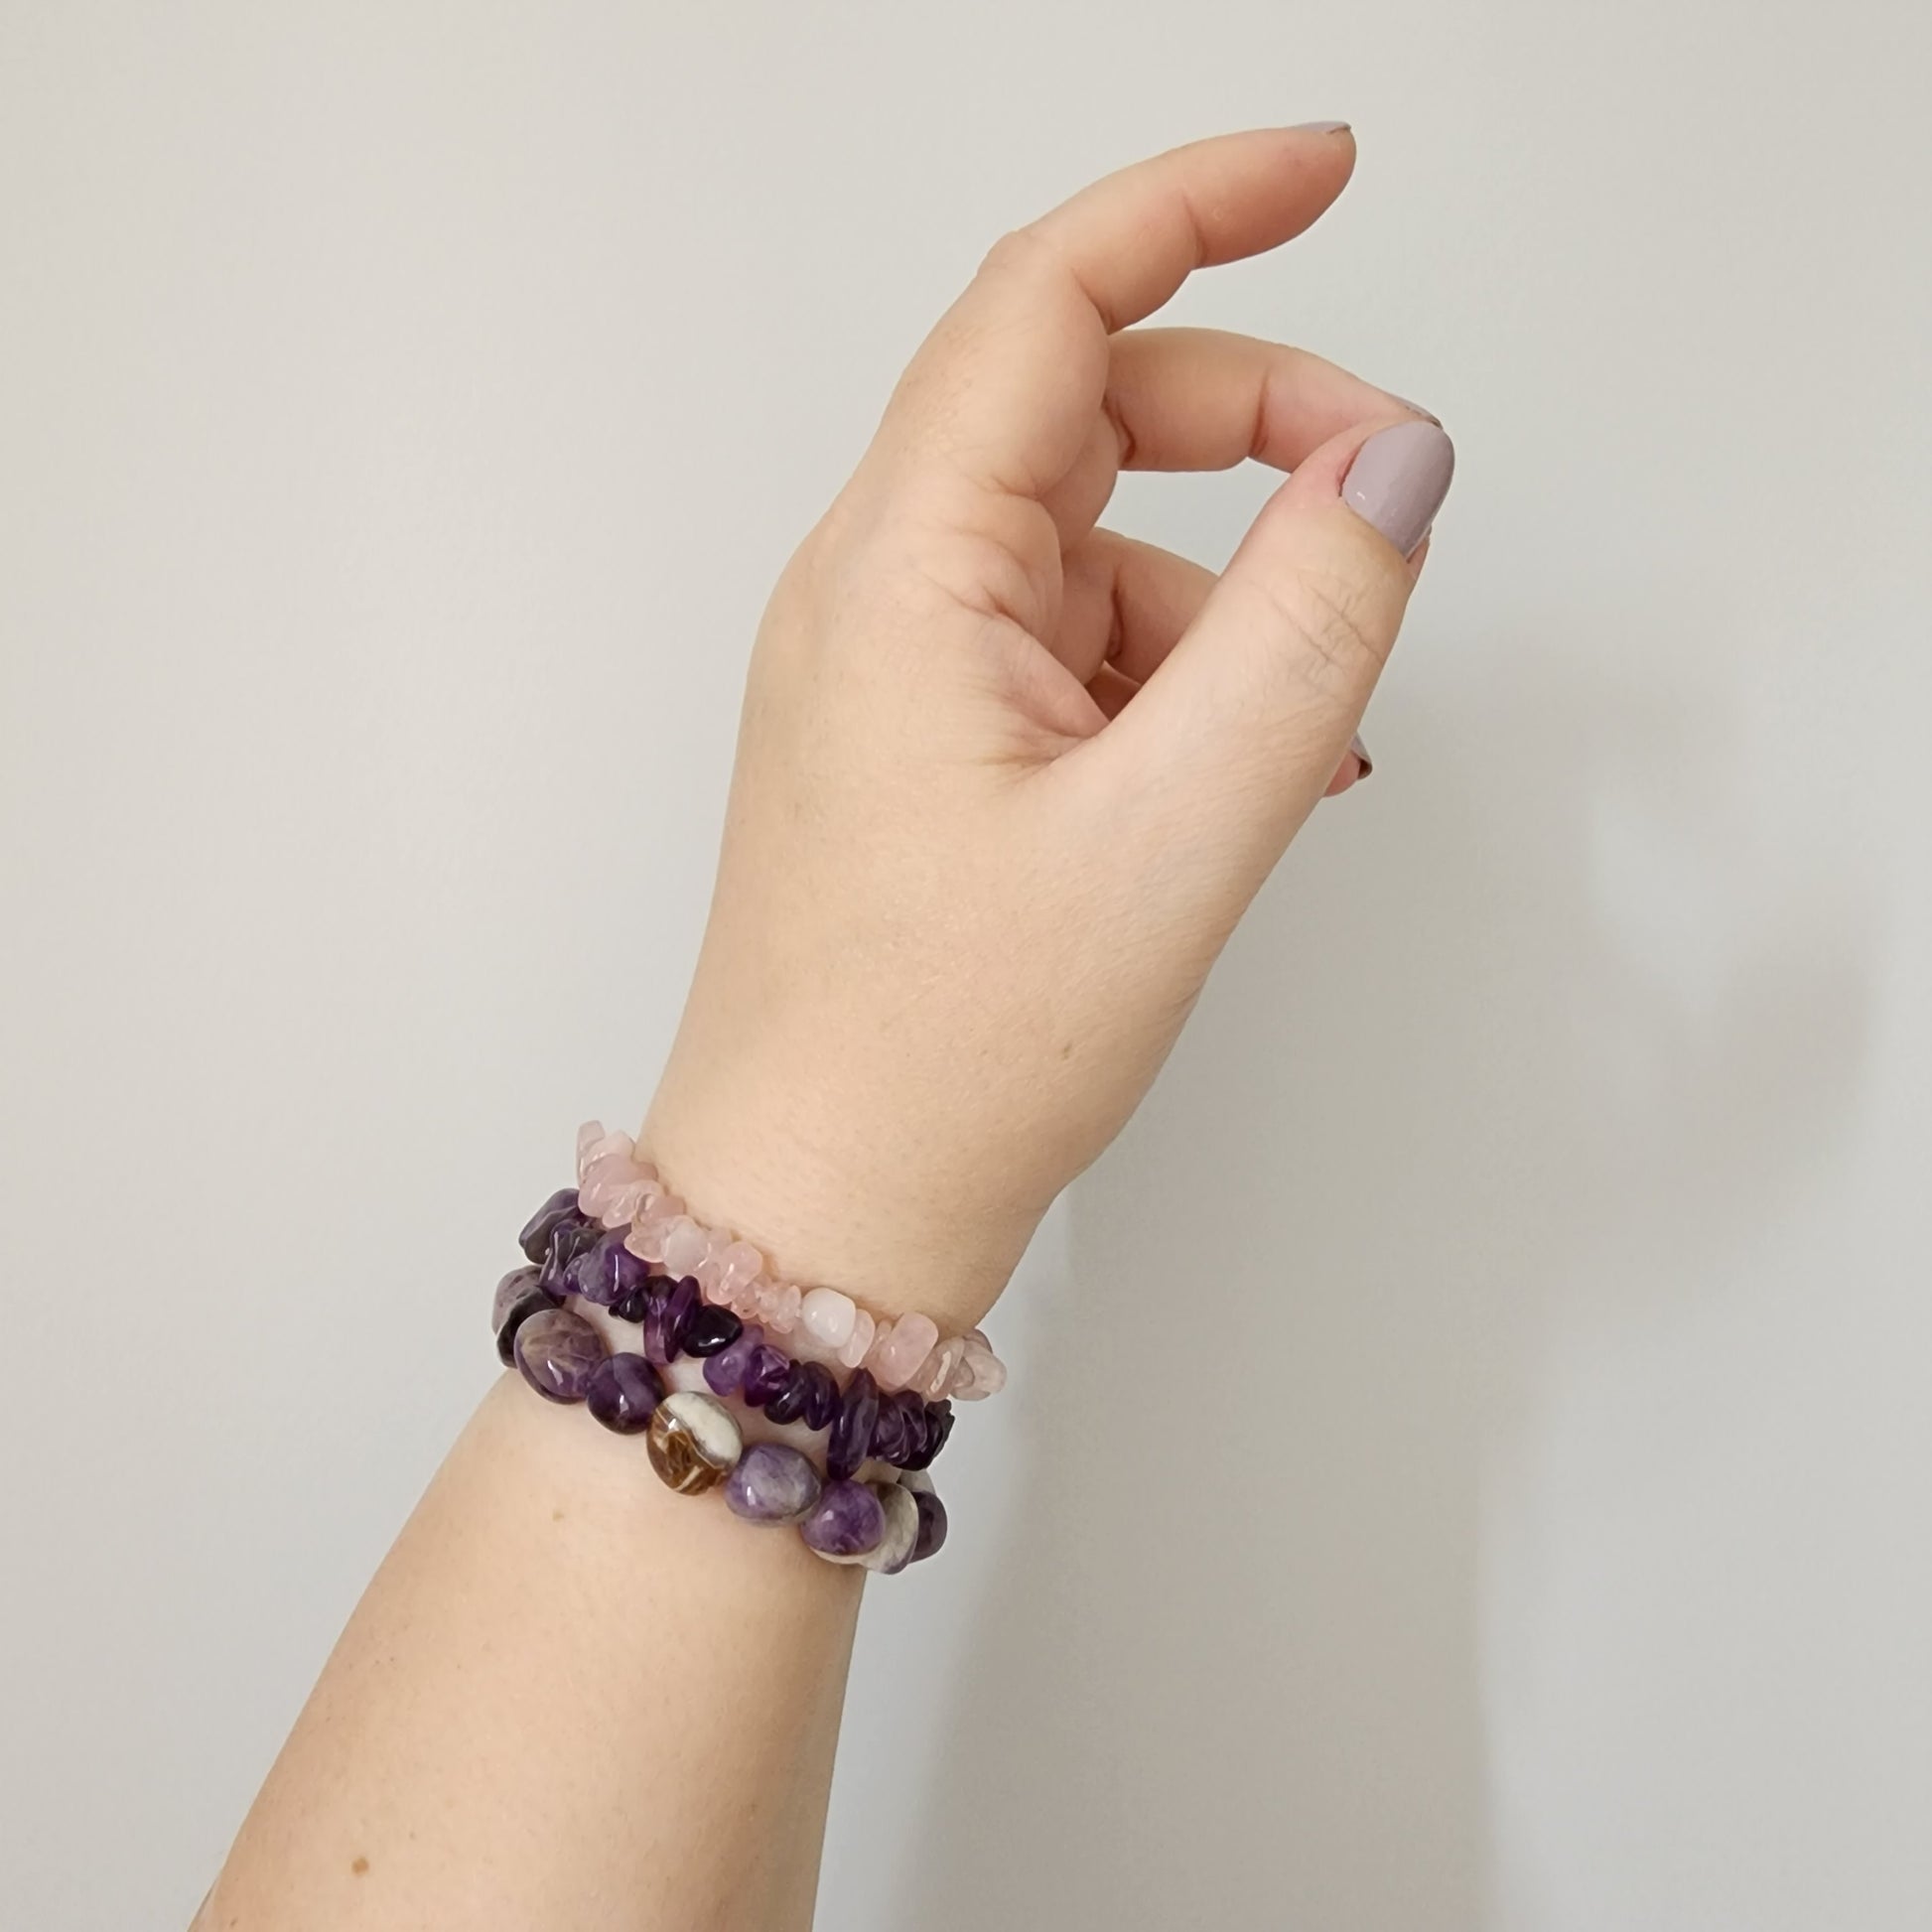 Hand and arm with multiple gemstone bracelets- rose quartz, amethyst and agate.